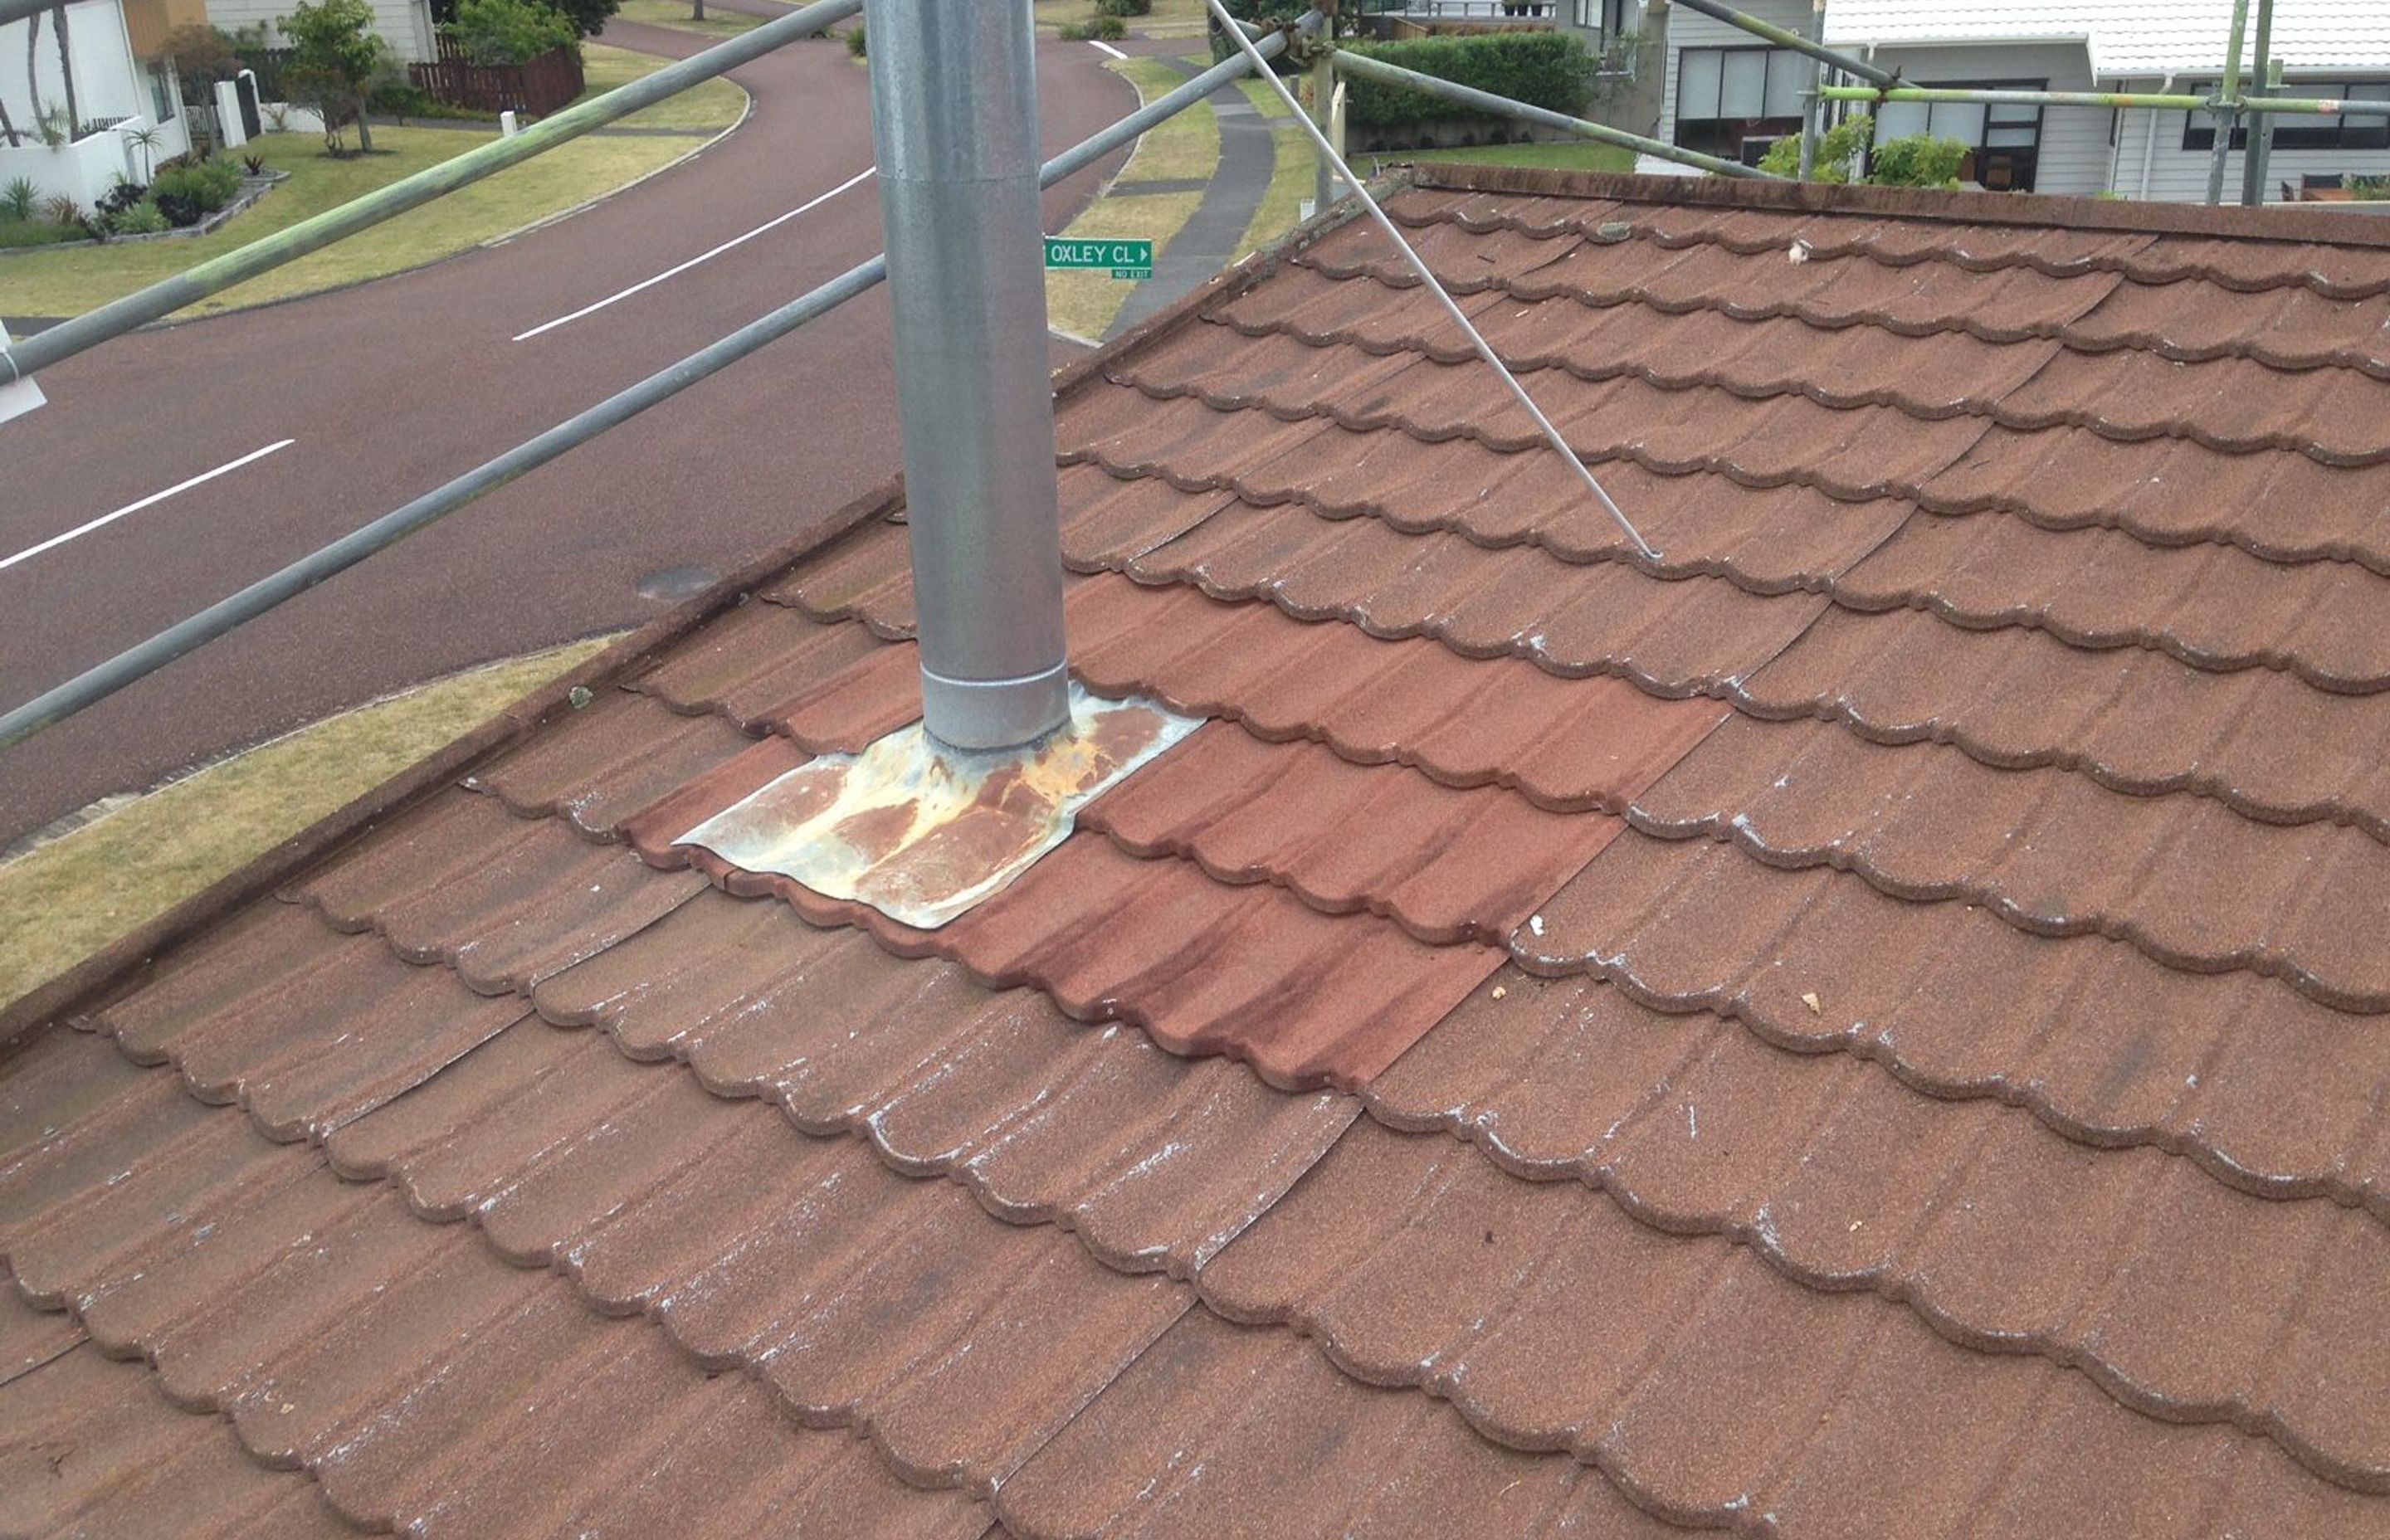 Flashing deteriation is a major cause of leaks